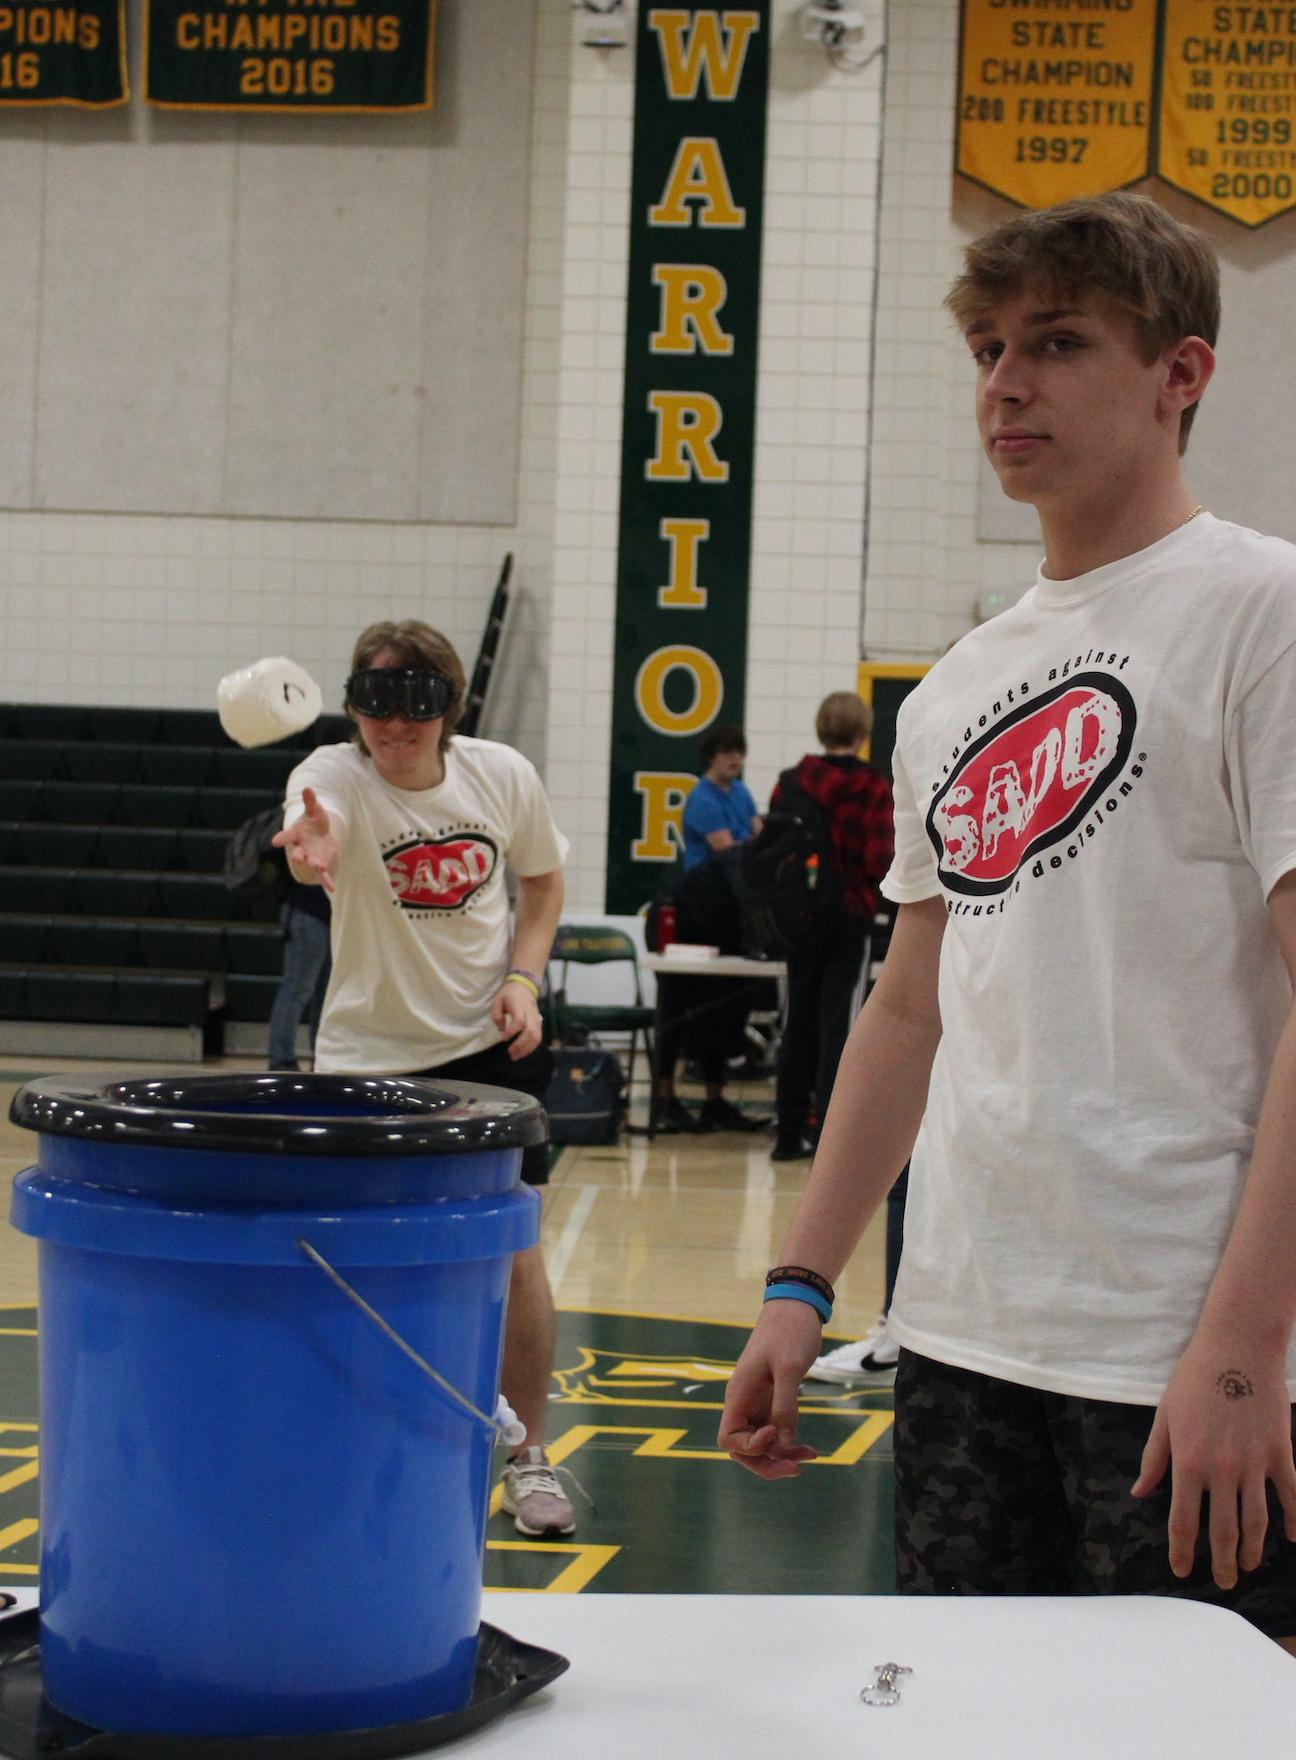 Wearing the simulation goggles, Xavier Solomon tries to toss a roll of toilet paper into a bucket while Nate Loughner observes